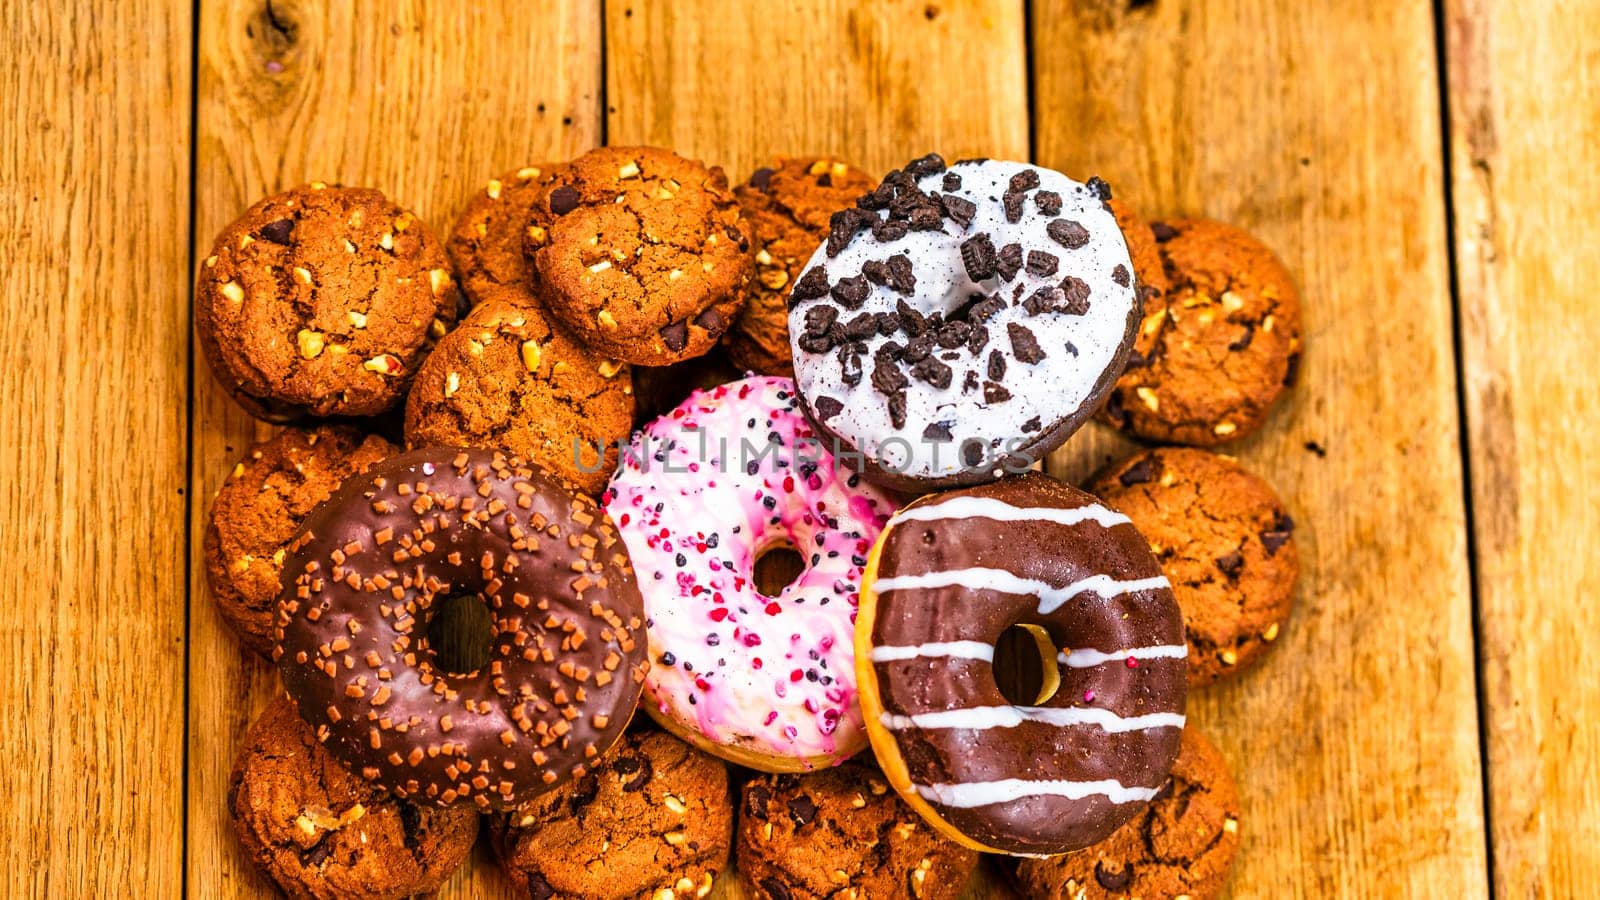 Colorful donuts on wooden table. Sweet icing sugar food with glazed sprinkles, doughnut with chocolate frosting. Top view with copy space by vladispas